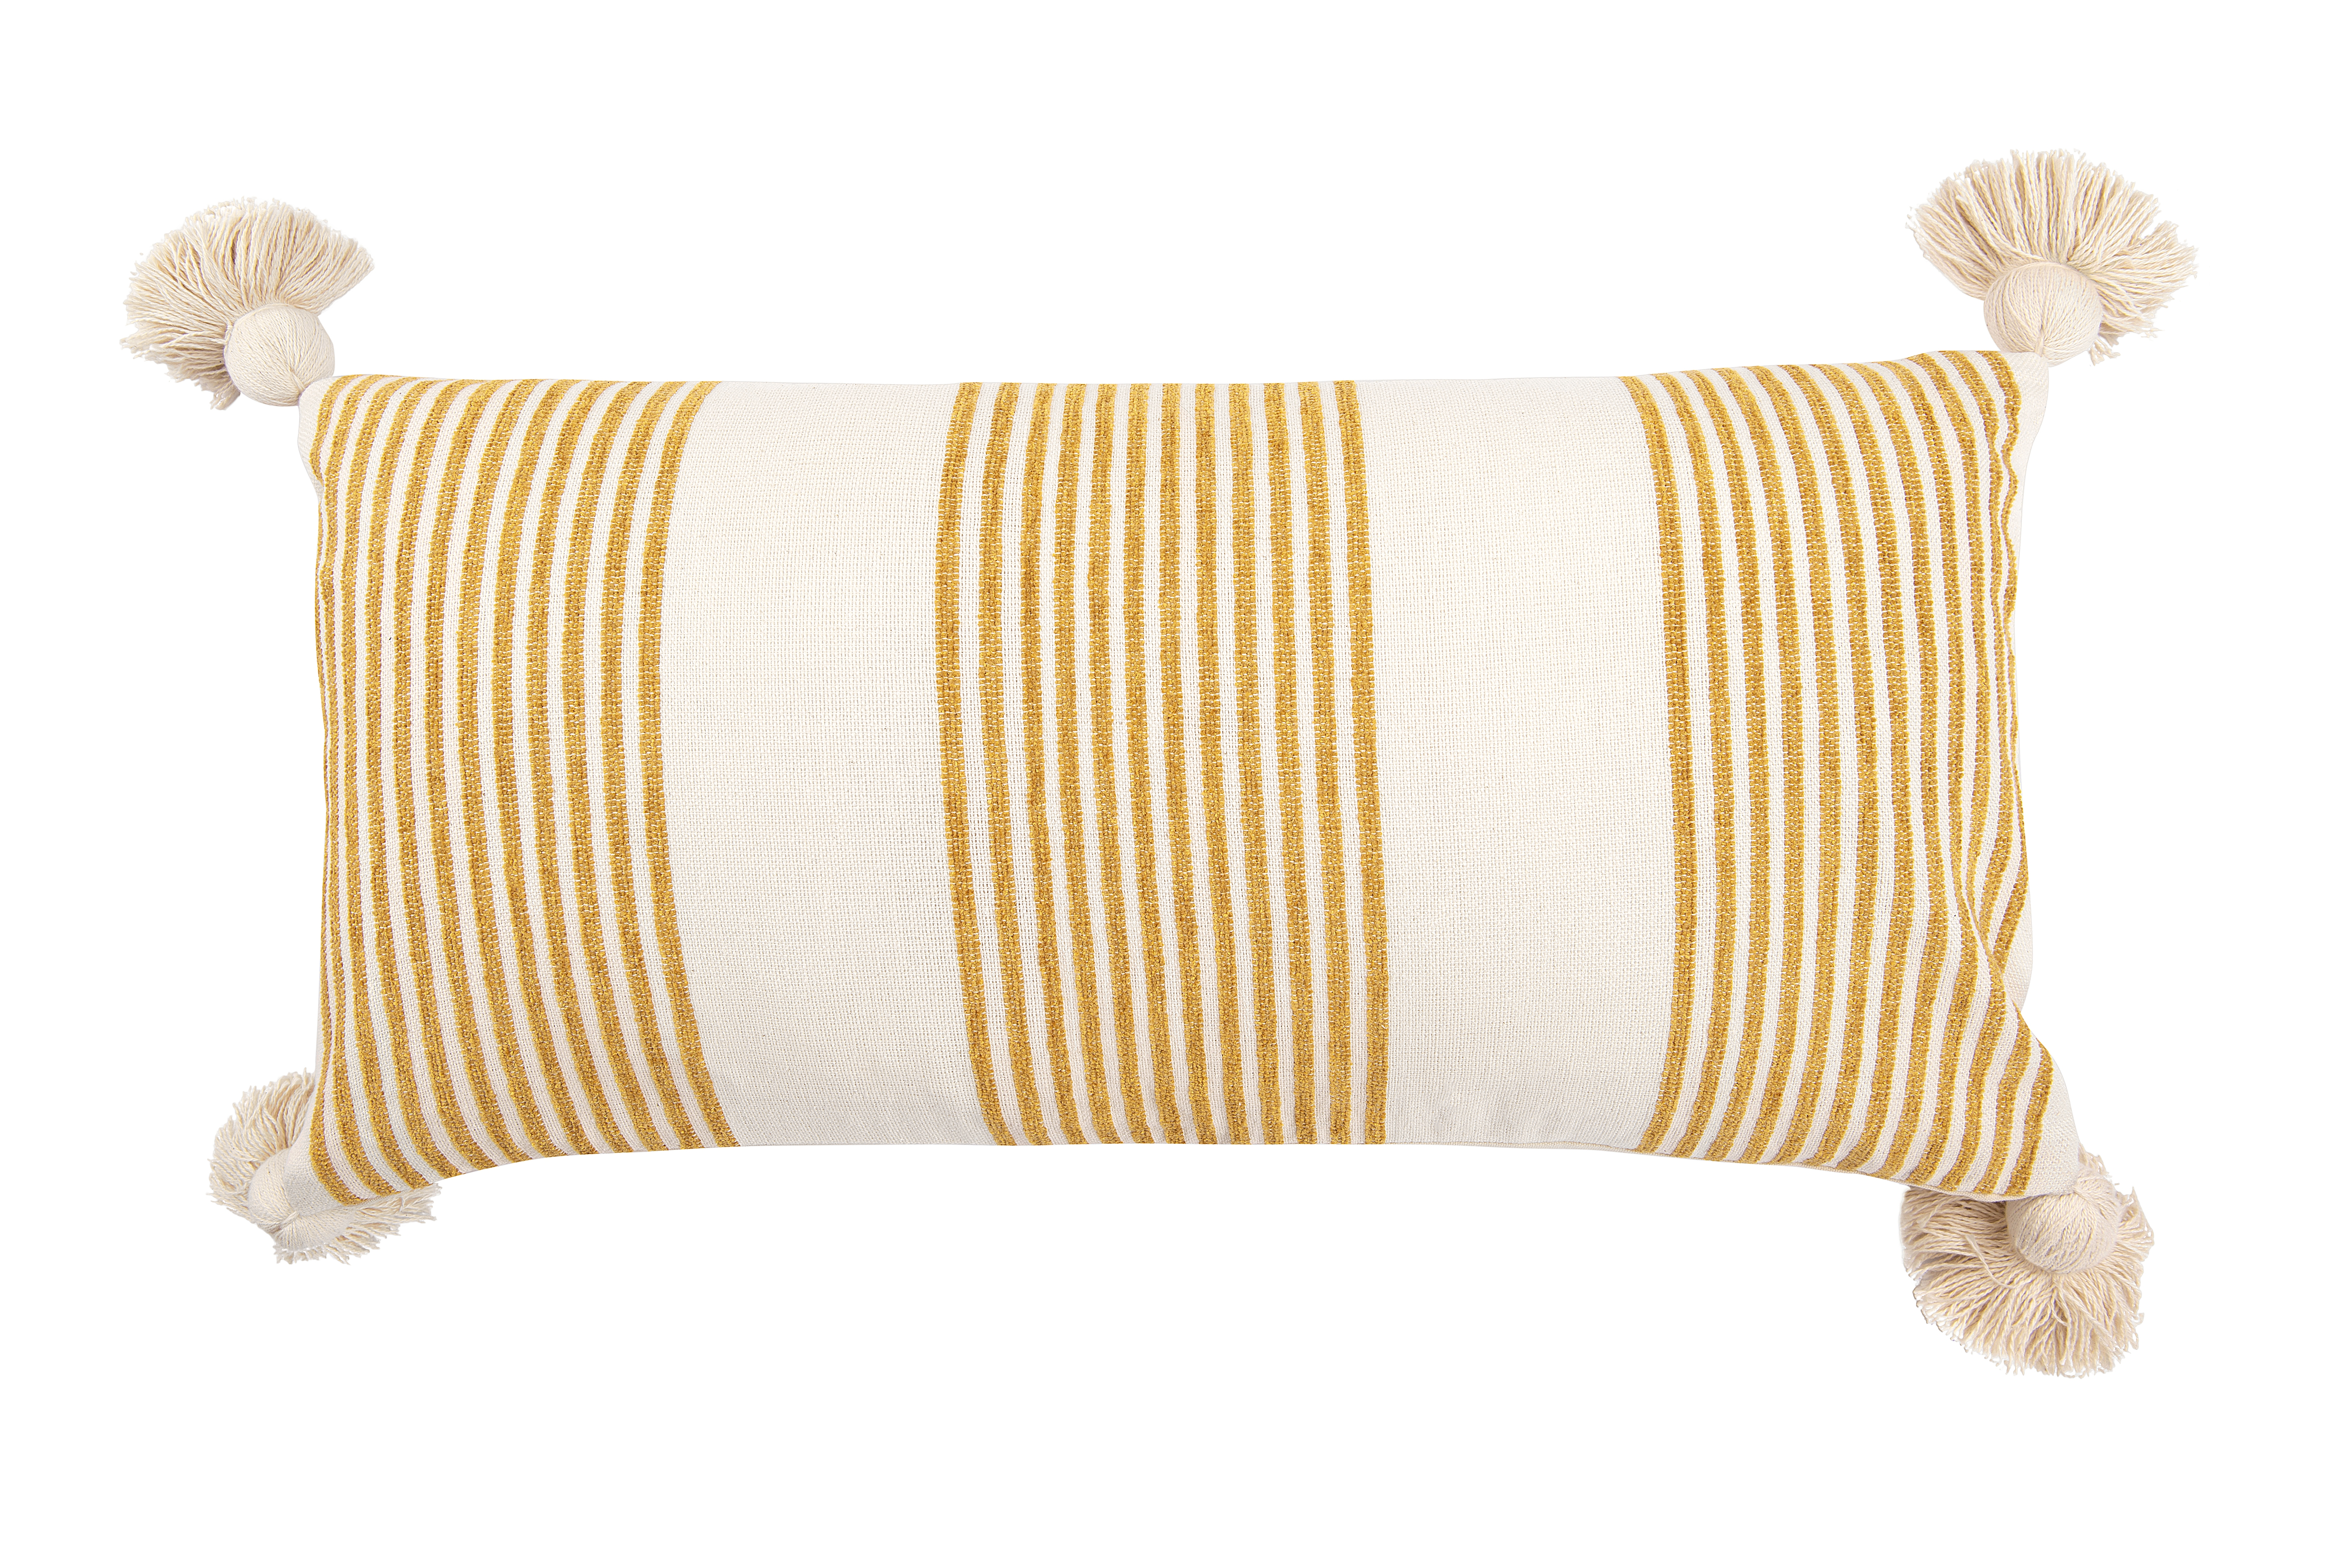 Cream Cotton & Chenille Pillow with Vertical Mustard Stripes, Tassels & Solid Cream Back - Nomad Home